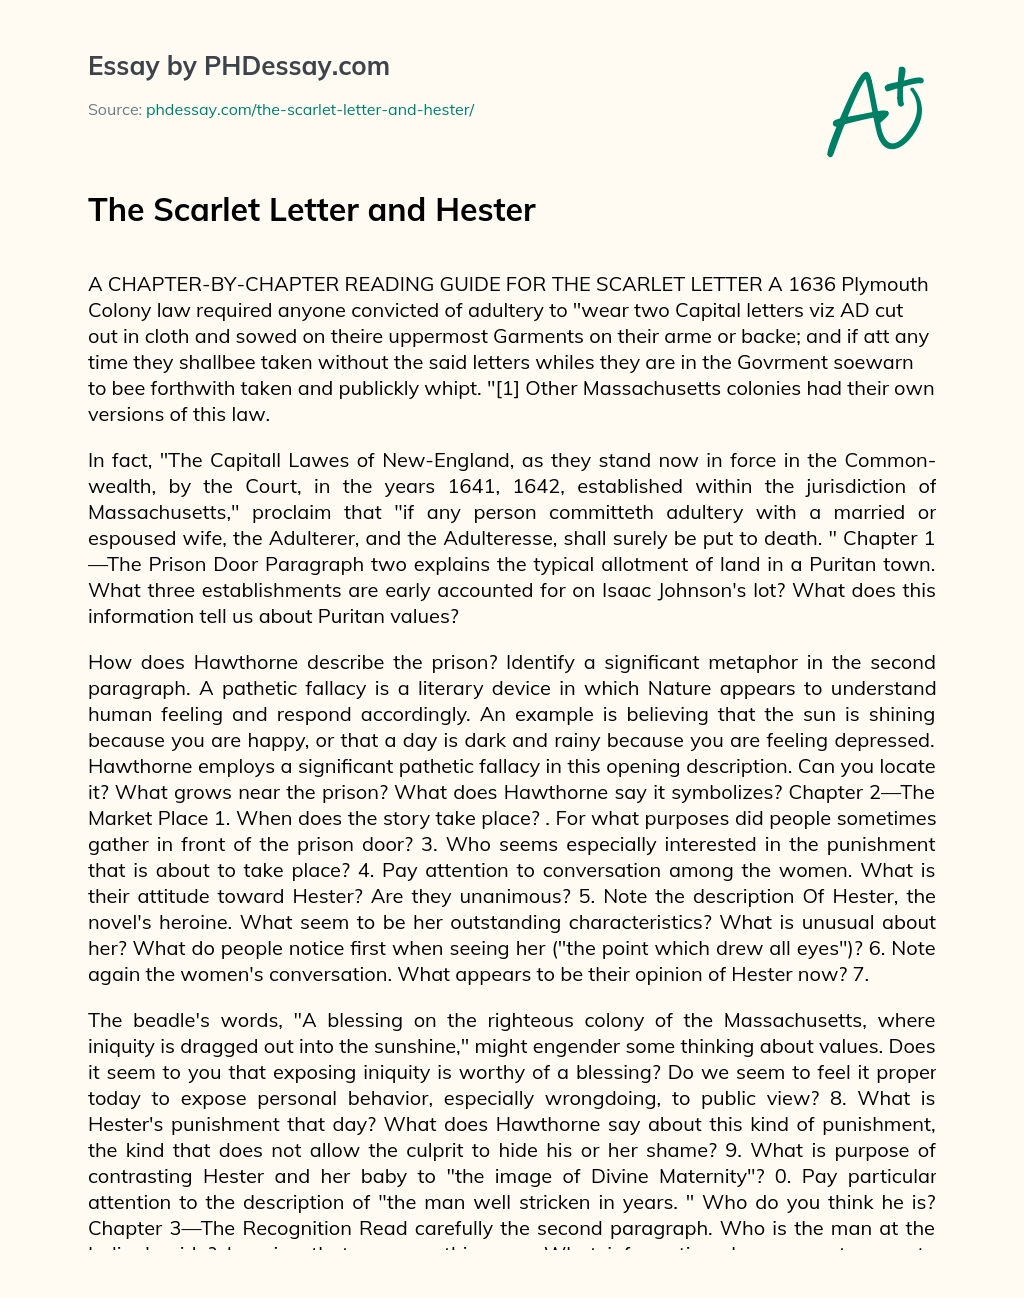 The Scarlet Letter and Hester essay